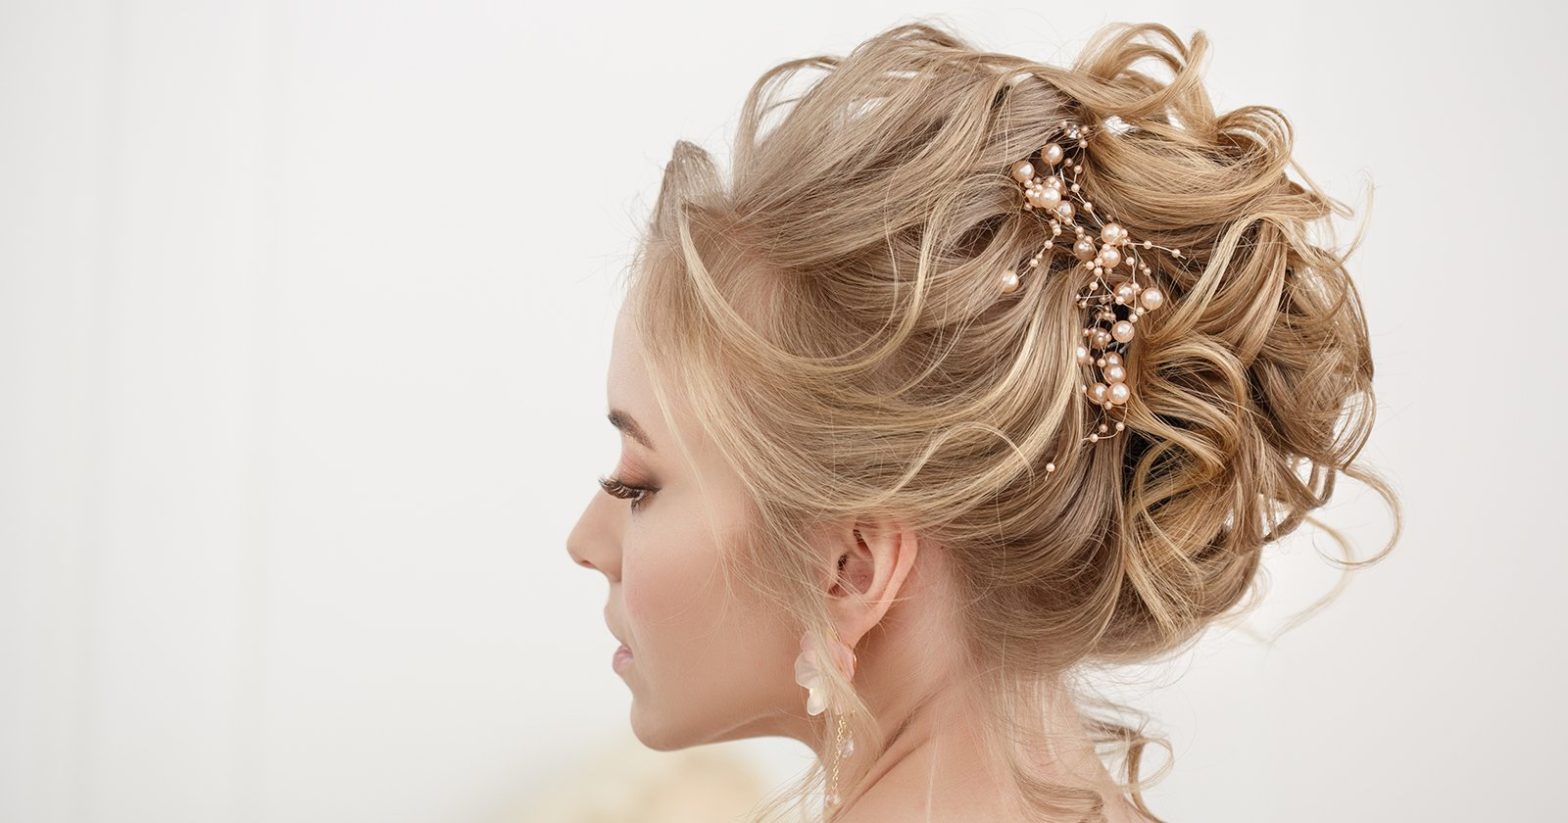 Tips to Achieve the Perfect Wedding Day Hairstyle